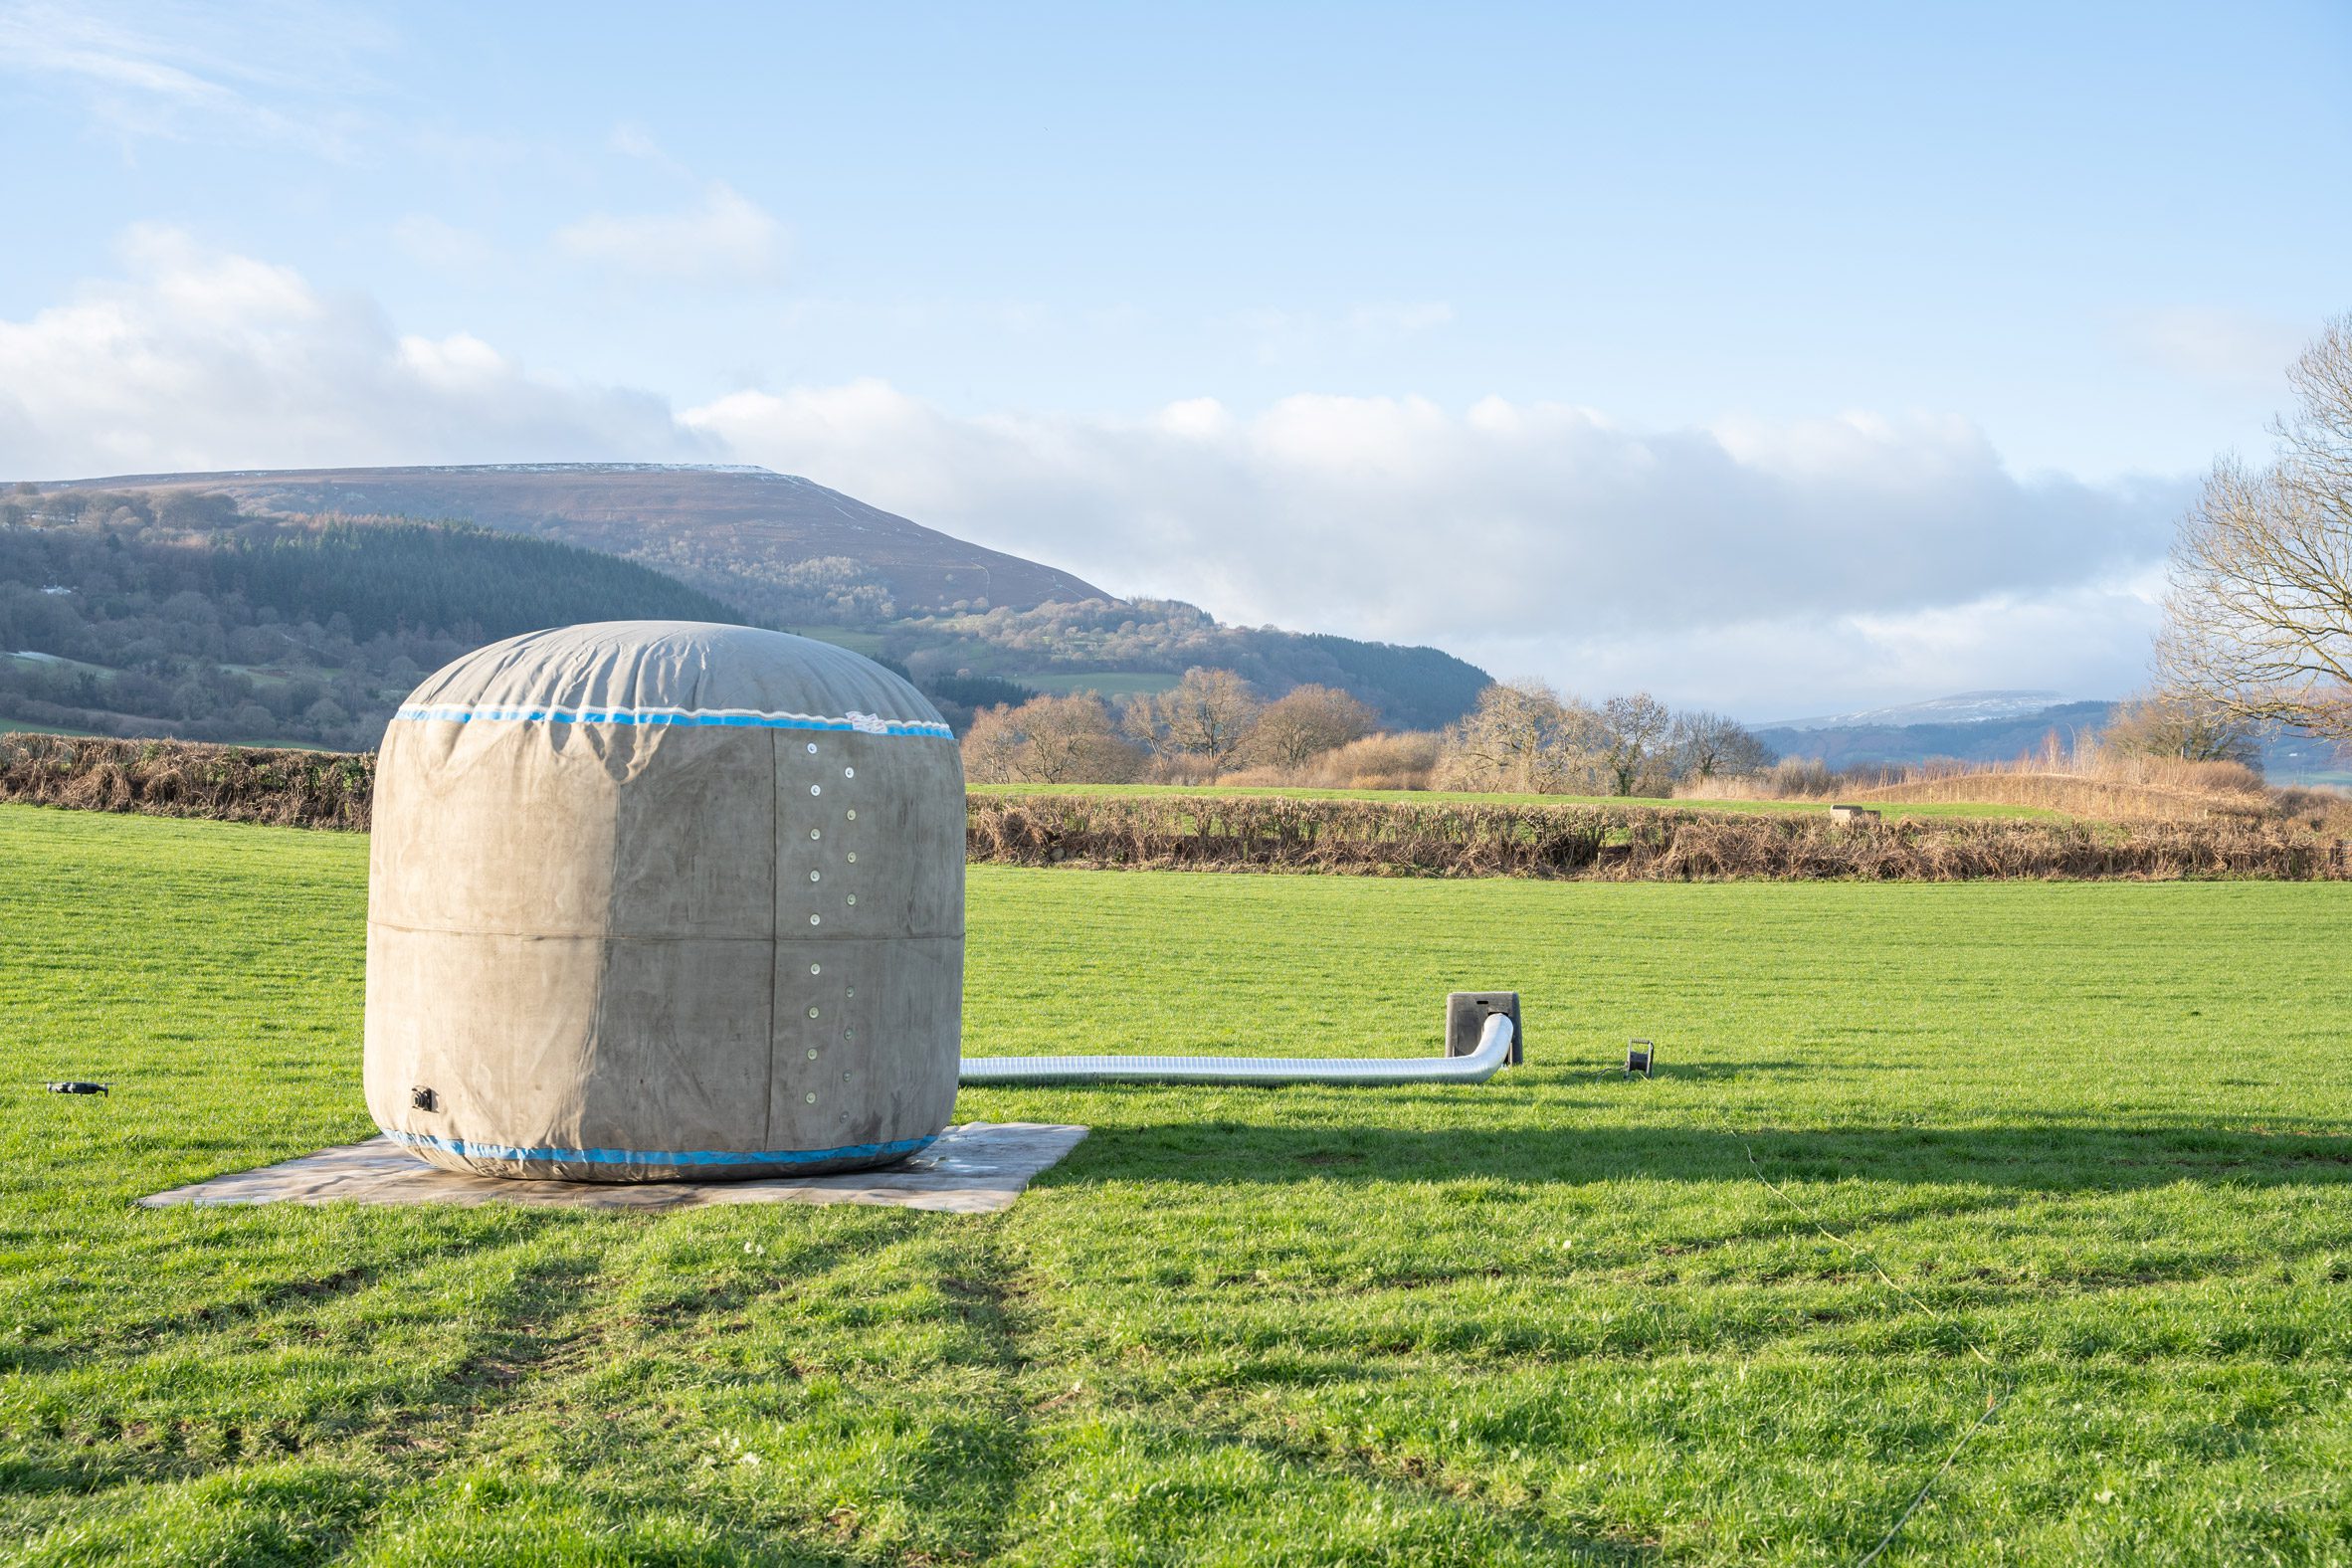 The exterior of Deploy water storage